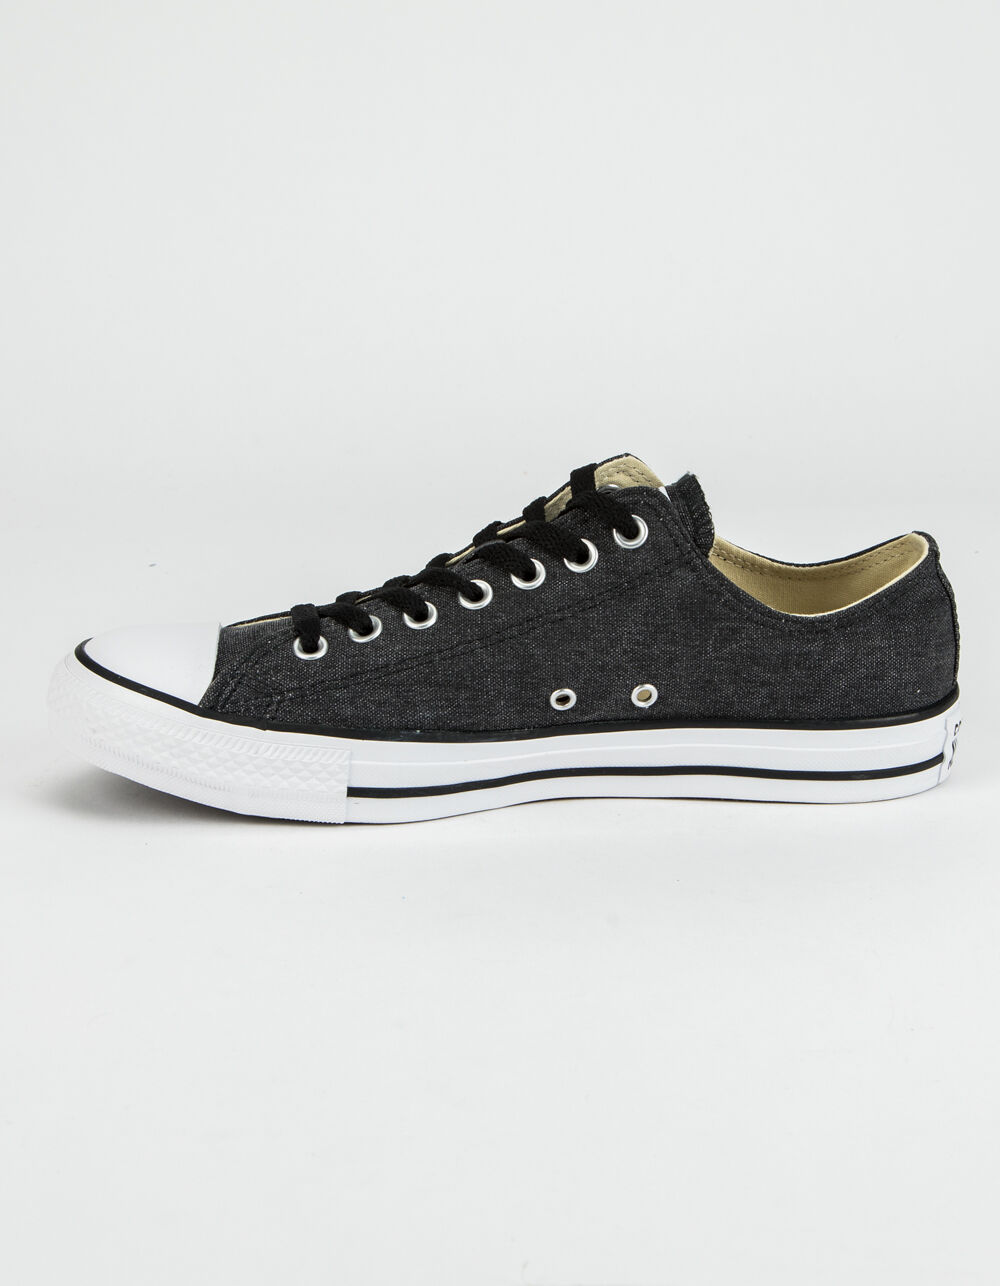 CONVERSE Chuck Taylor All Star Black & White Low Top Shoes - BLACK ...